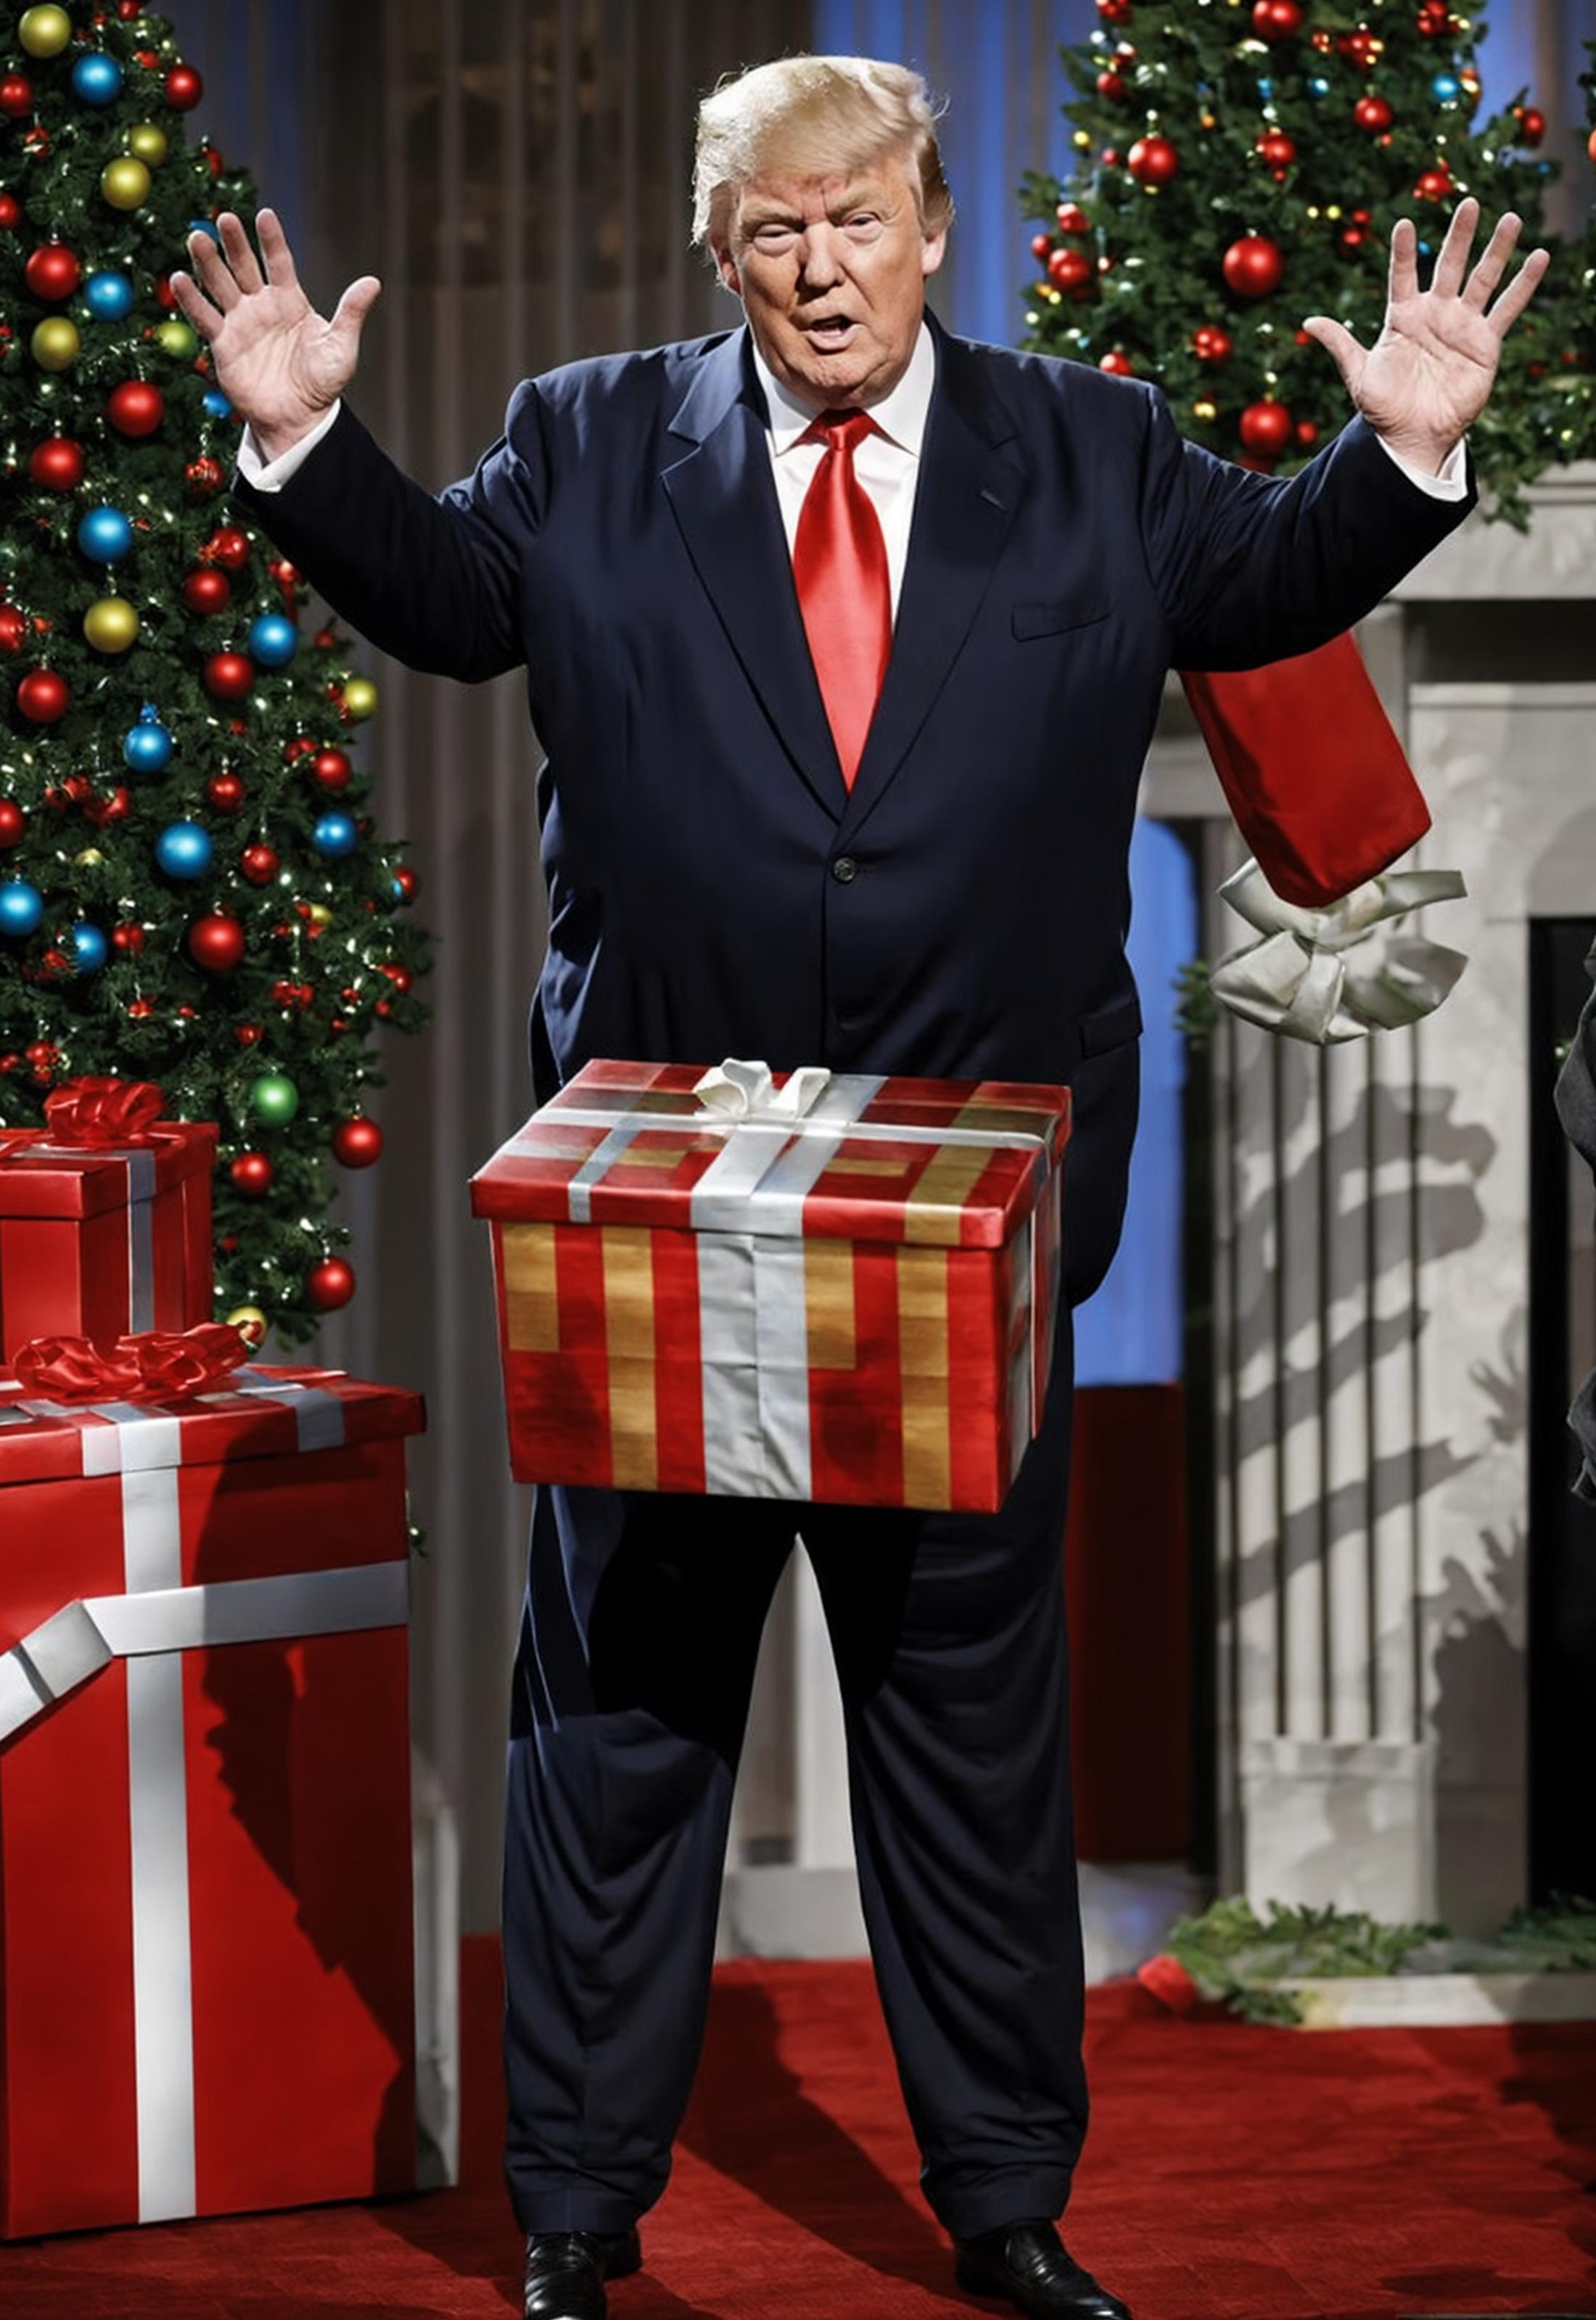 A man in a suit holding a large gift box.